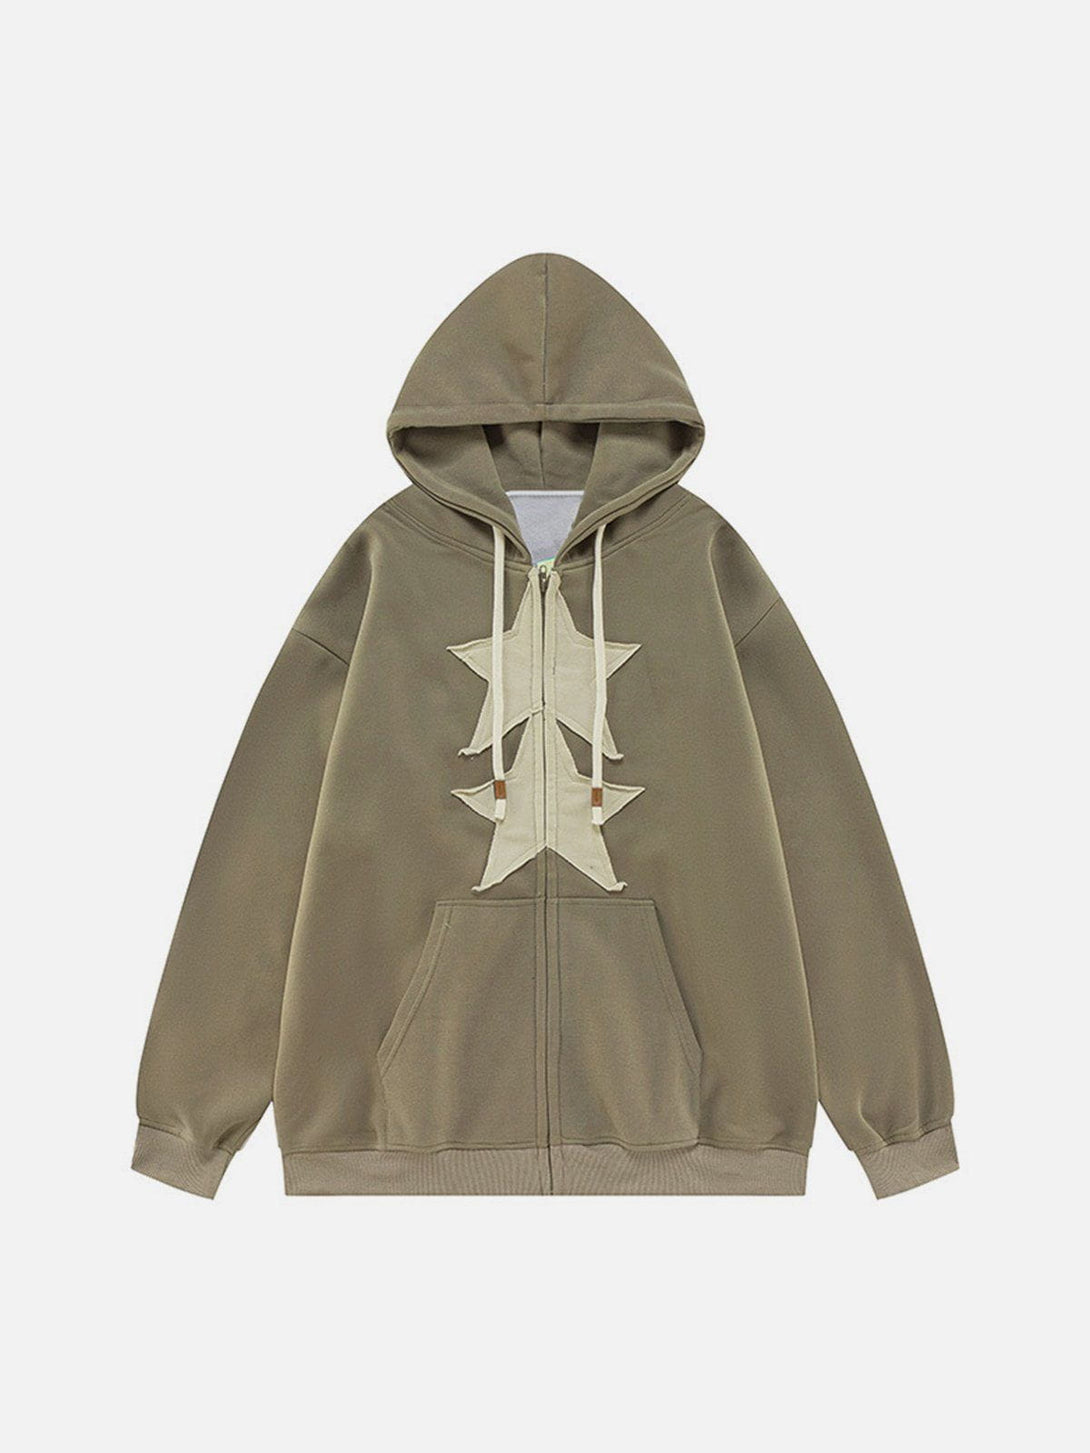 Majesda® - Embroidery Star Zip Up Hoodie outfit ideas streetwear fashion